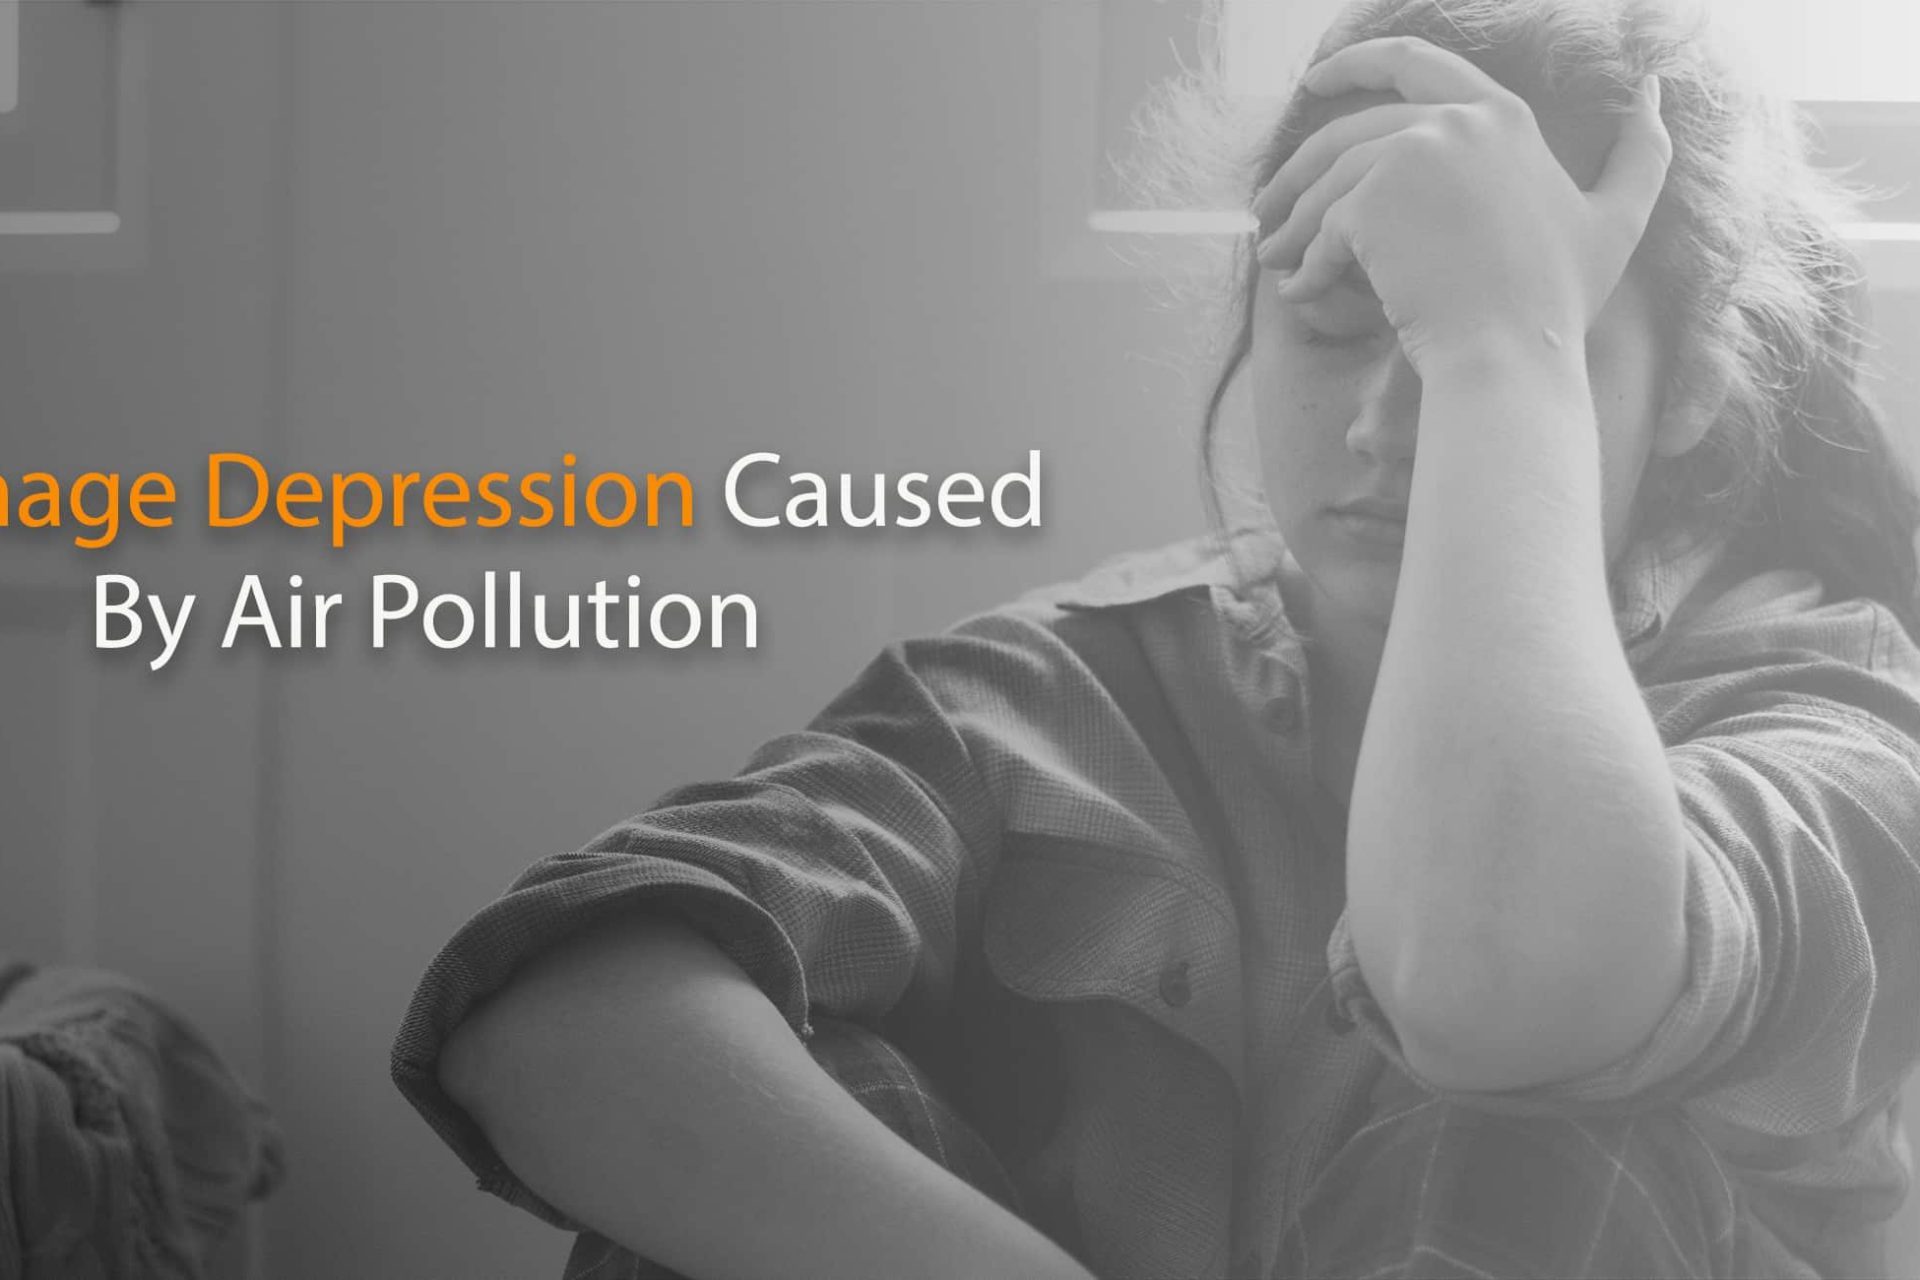 teenage depression caused due to air pollution